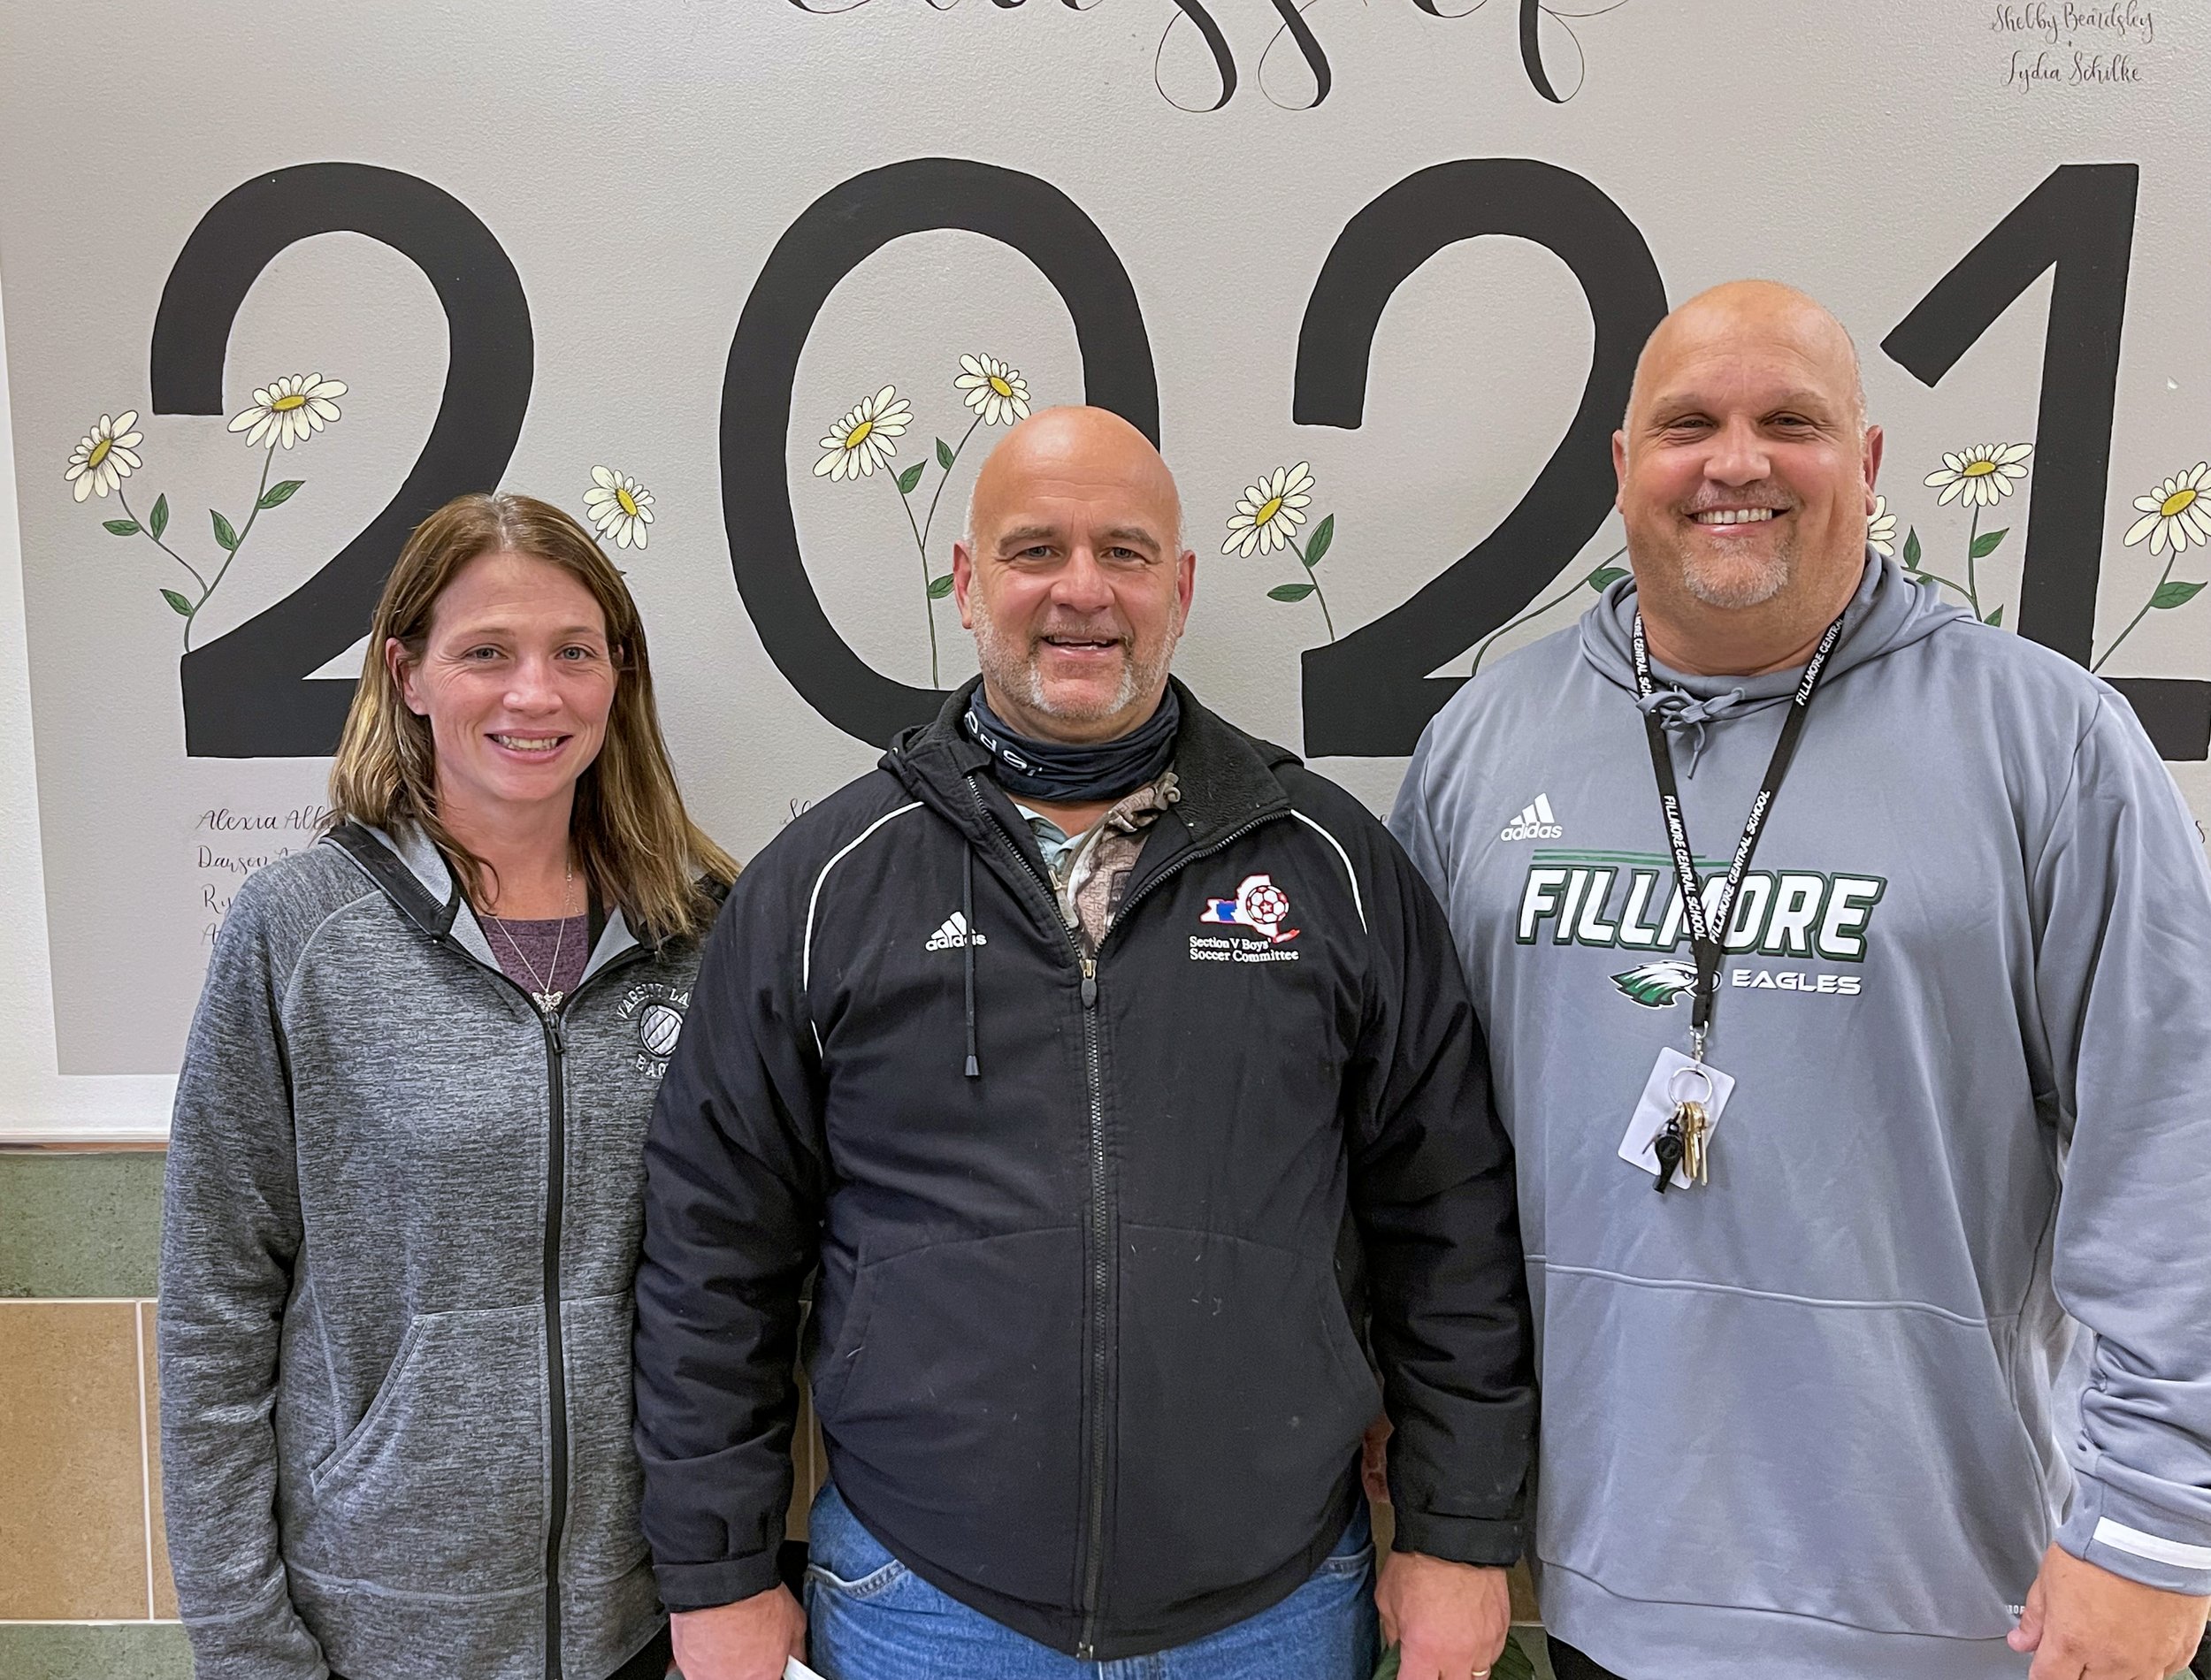  From left to right, the minds behind one of Fillmore’s most successful seasons in recent memory this past fall: Girls volleyball head coach Lacie Fuller, former boys soccer head coach Jamie Mullen, and girls soccer head coach and the school’s Athlet